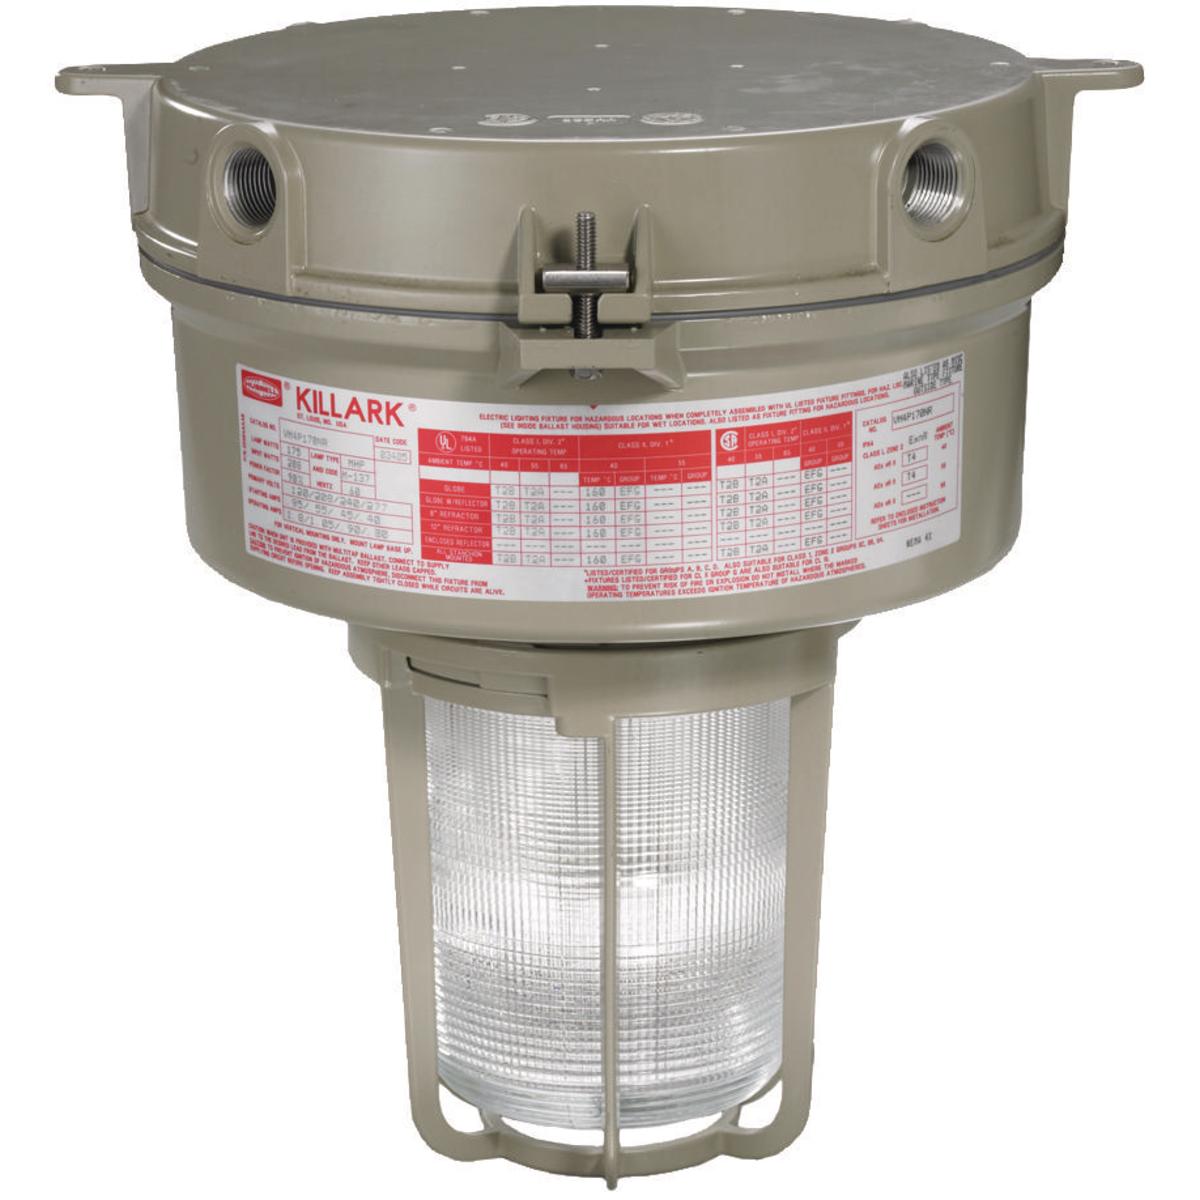 Hubbell VE3Q2626E30X2GLG VE3 26W Normal/Emergency,120-277V, 3/4" Ceiling Mount,Globe with Guard  ; Quad-Pin triple-tube long-life compact fluorescent lamps included ; World Voltage 120-277VAC 50-60 Hz ; LED charging indicator light visible through lens ; Prewired terminal block f